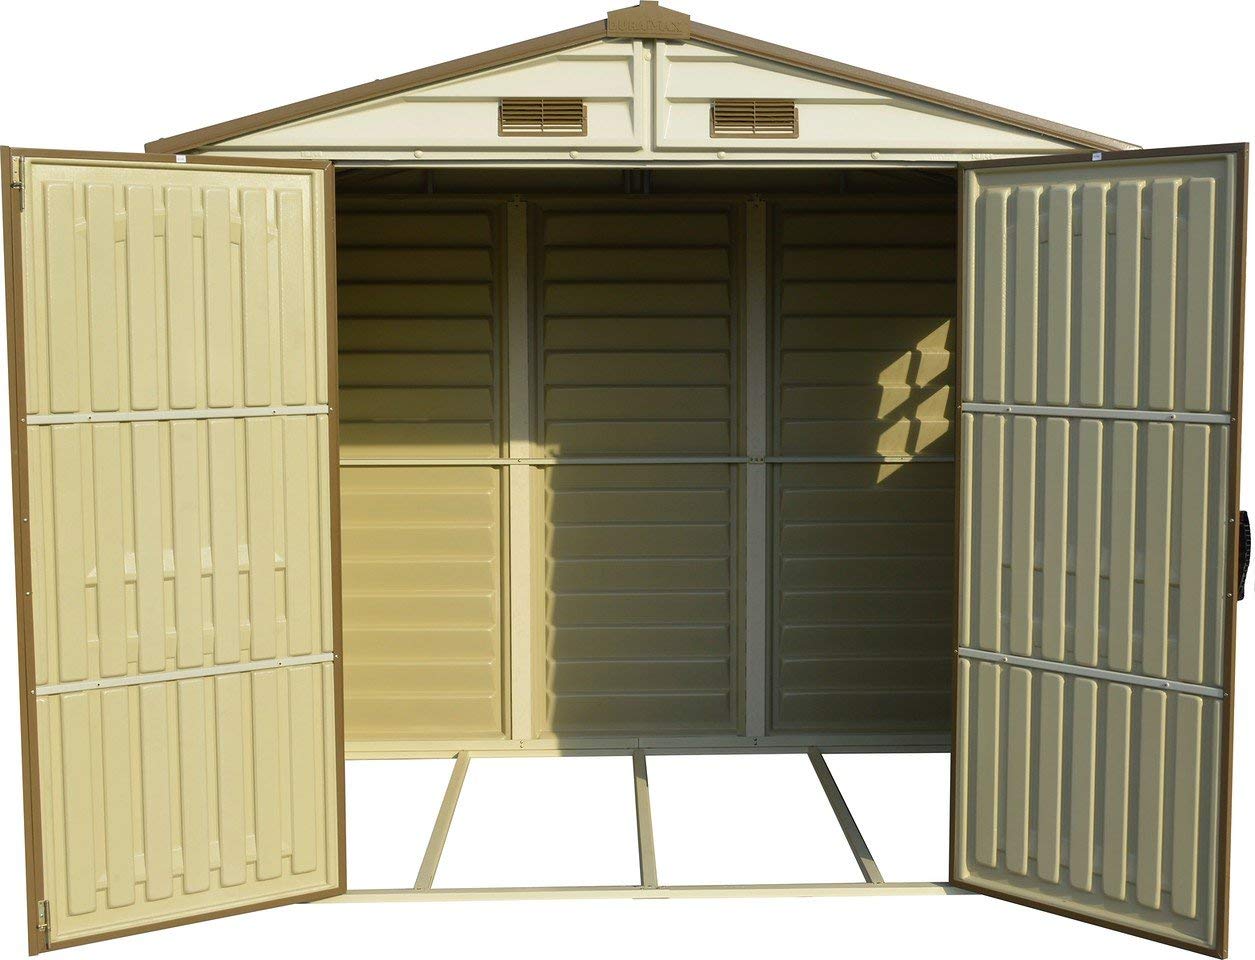 Duramax 30115 StoreAll Vinyl Storage Shed, Offwhite/Brown